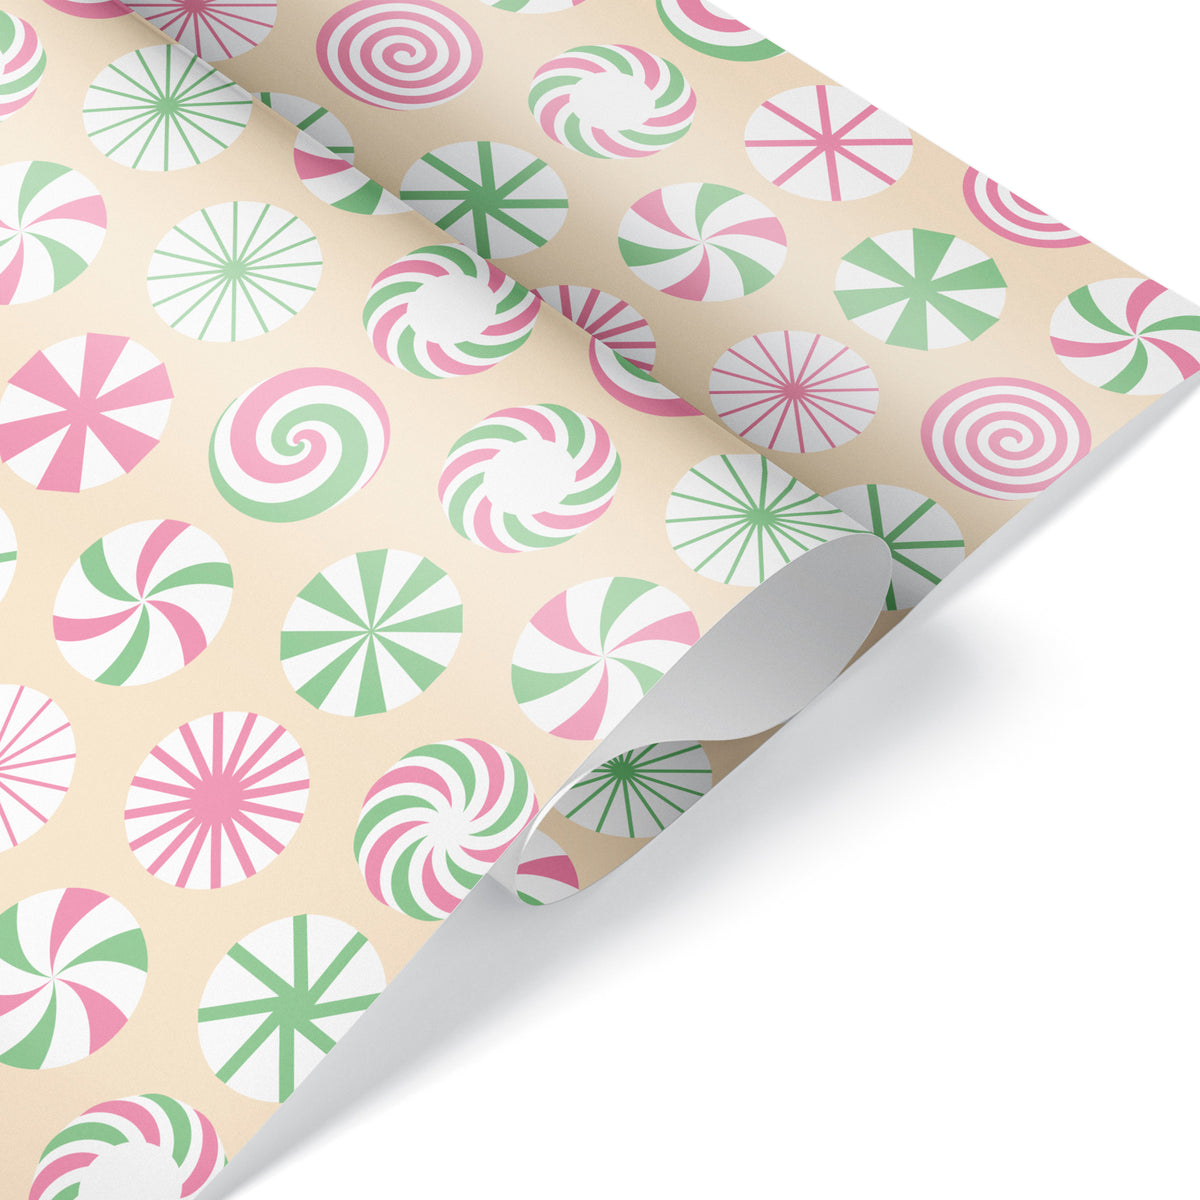 Peppermint Candy Christmas Wrapping Paper - PASTEL